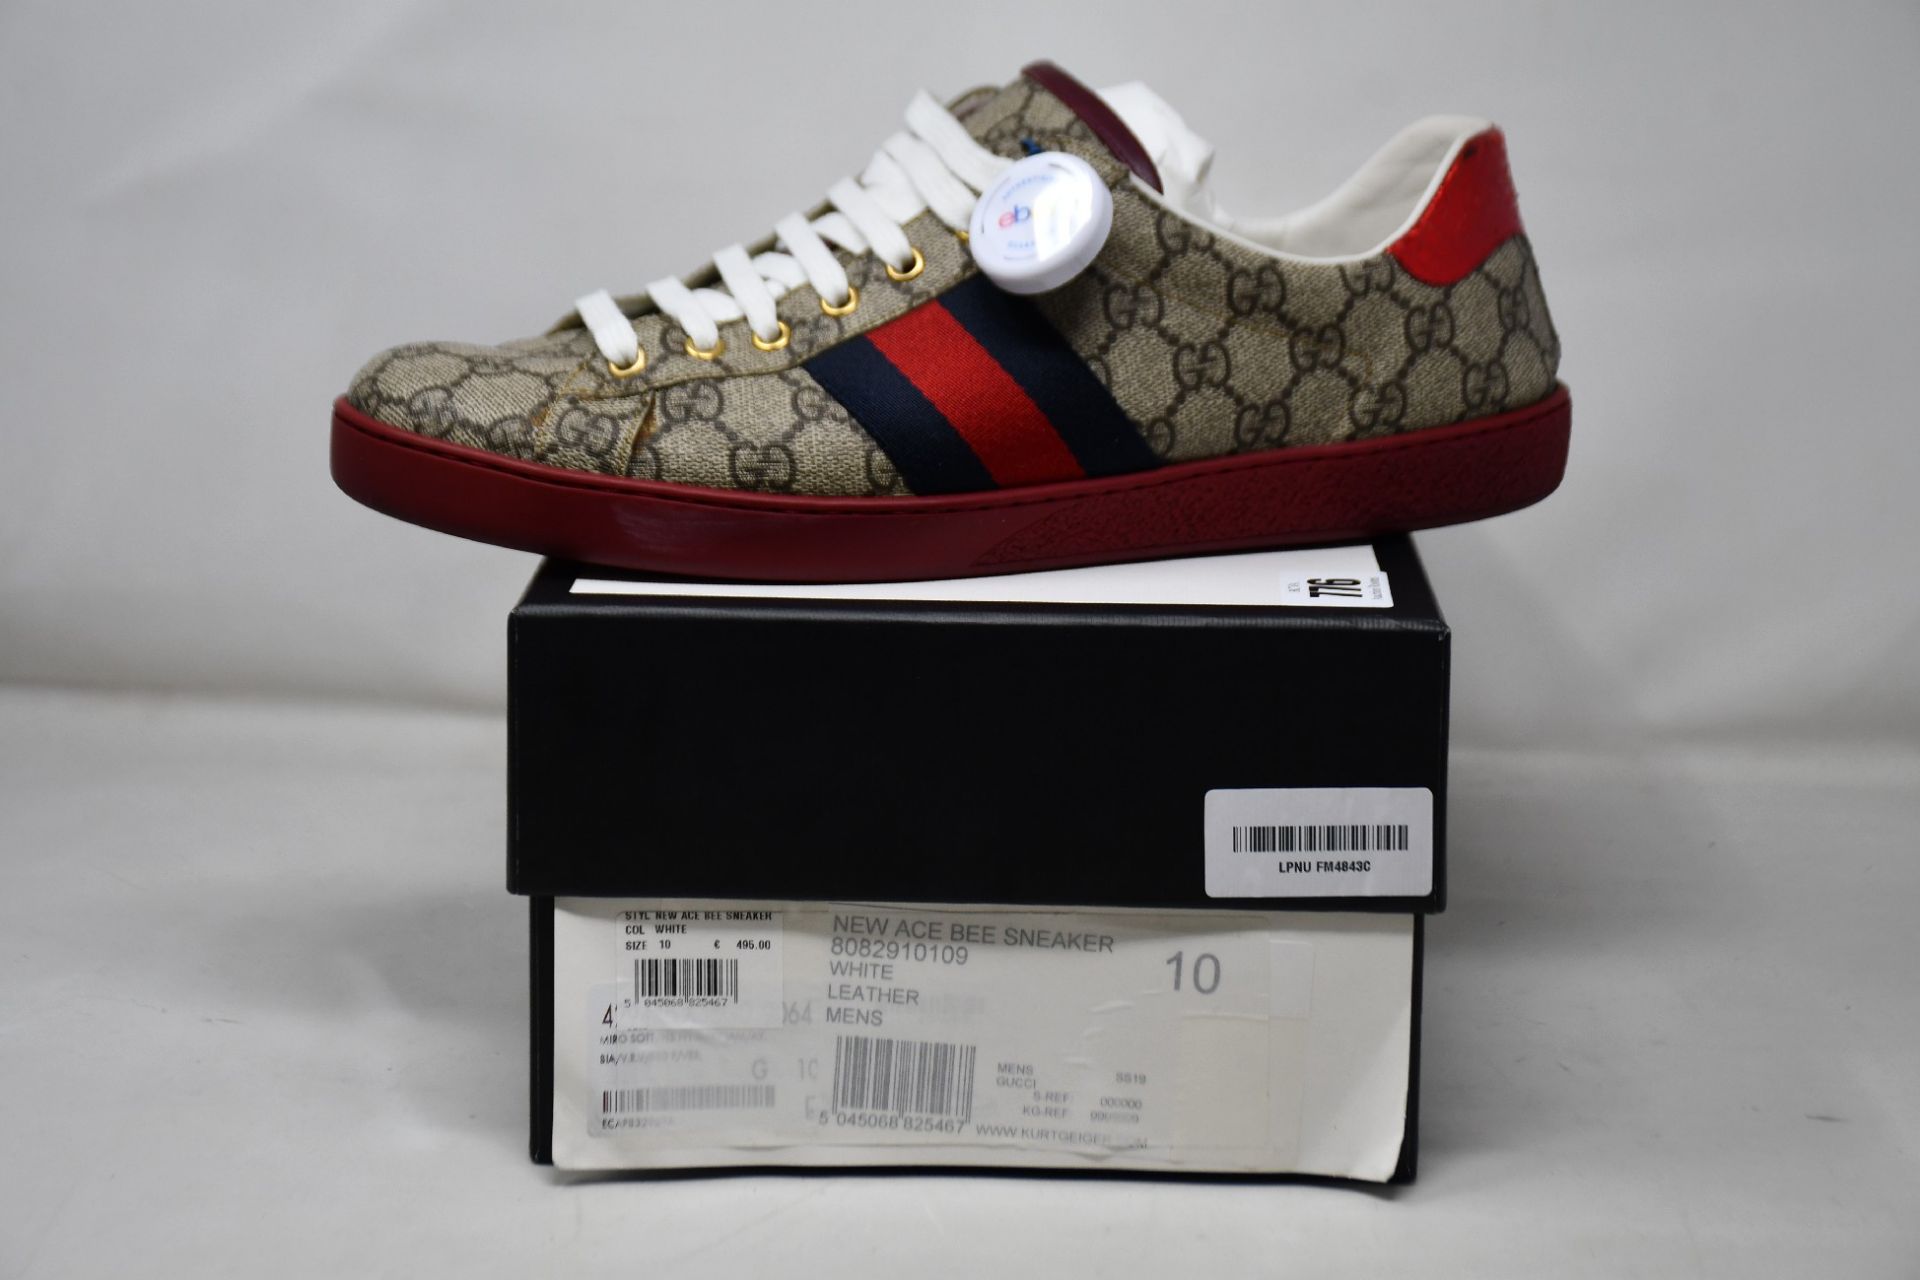 A pair of men's pre-owned Gucci Ace GG Supreme sneakers with authentication tag (UK 10).